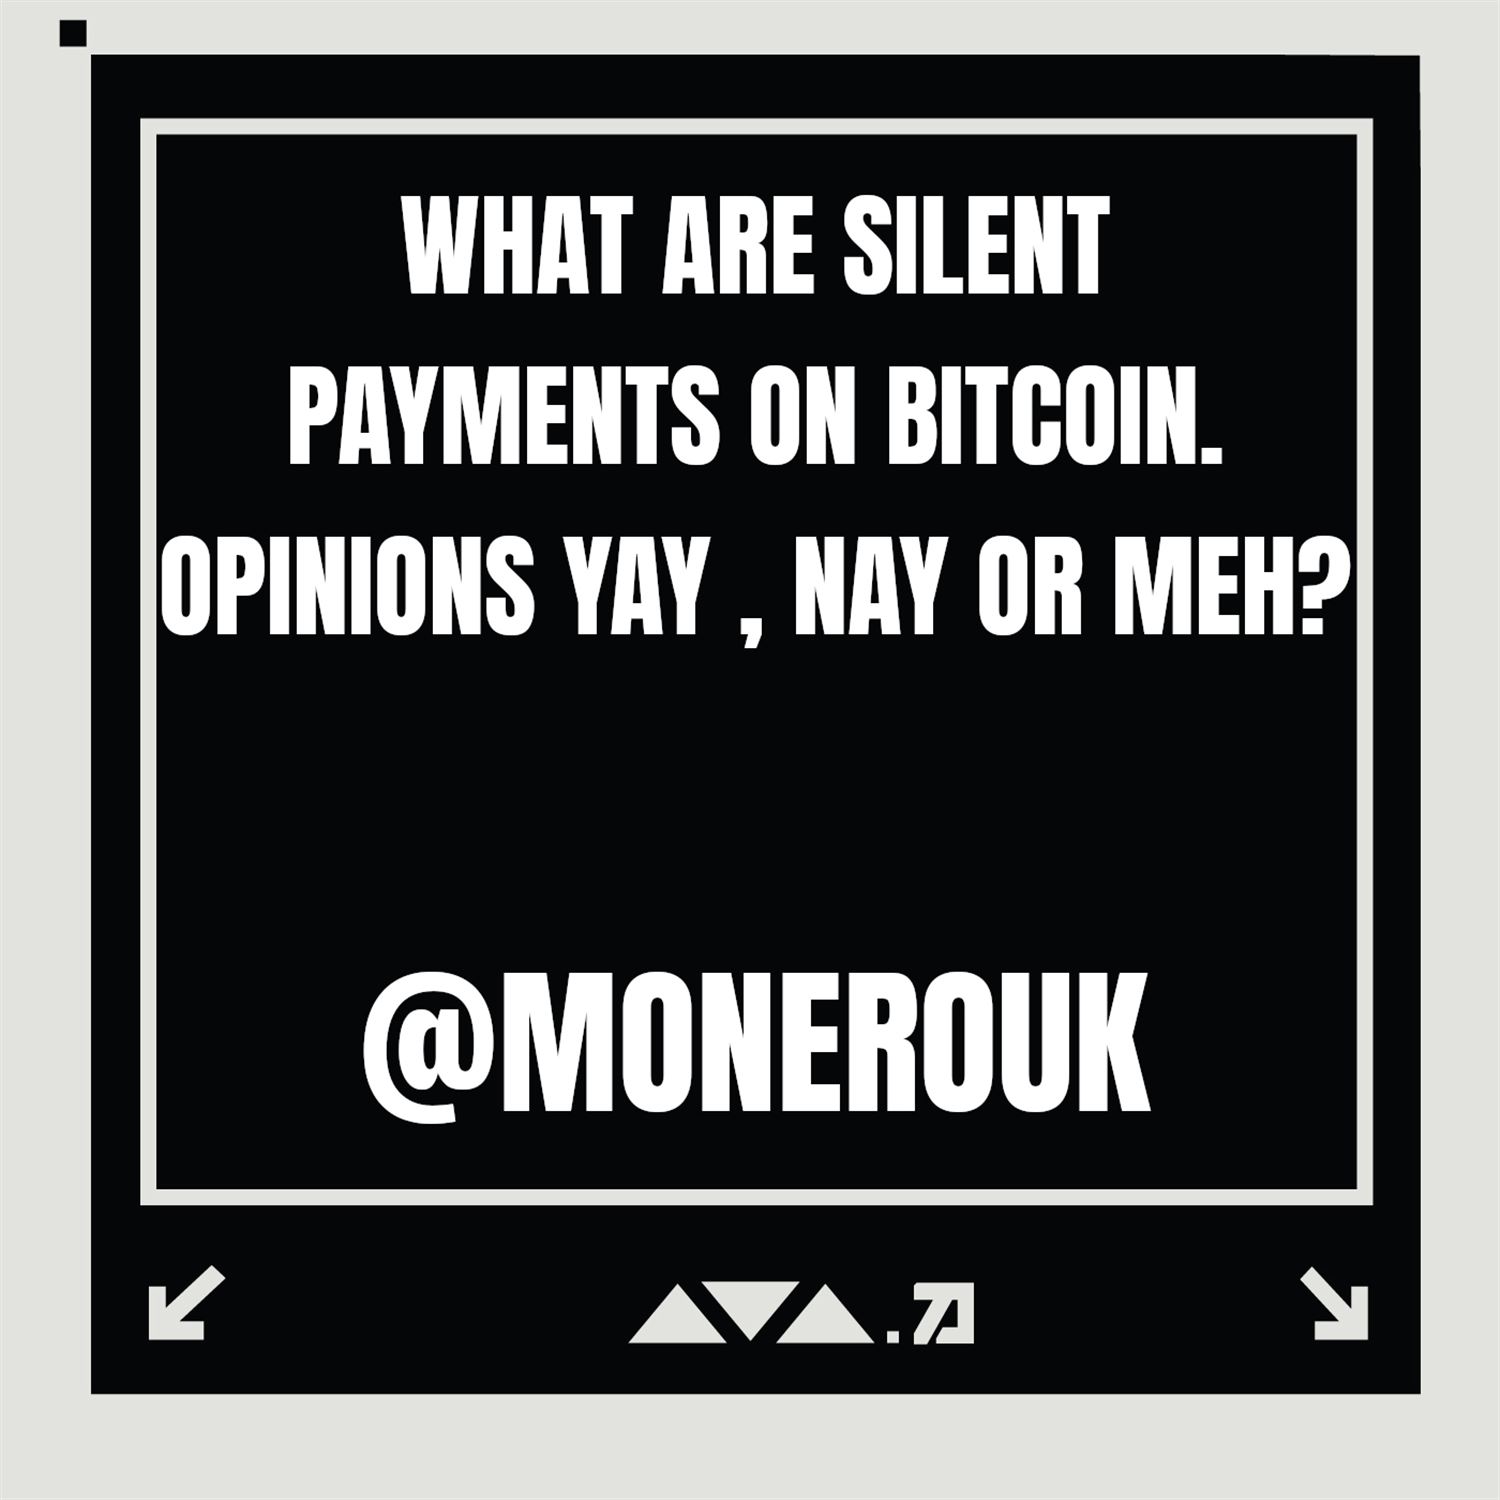 Q6: What are Silent Payments?